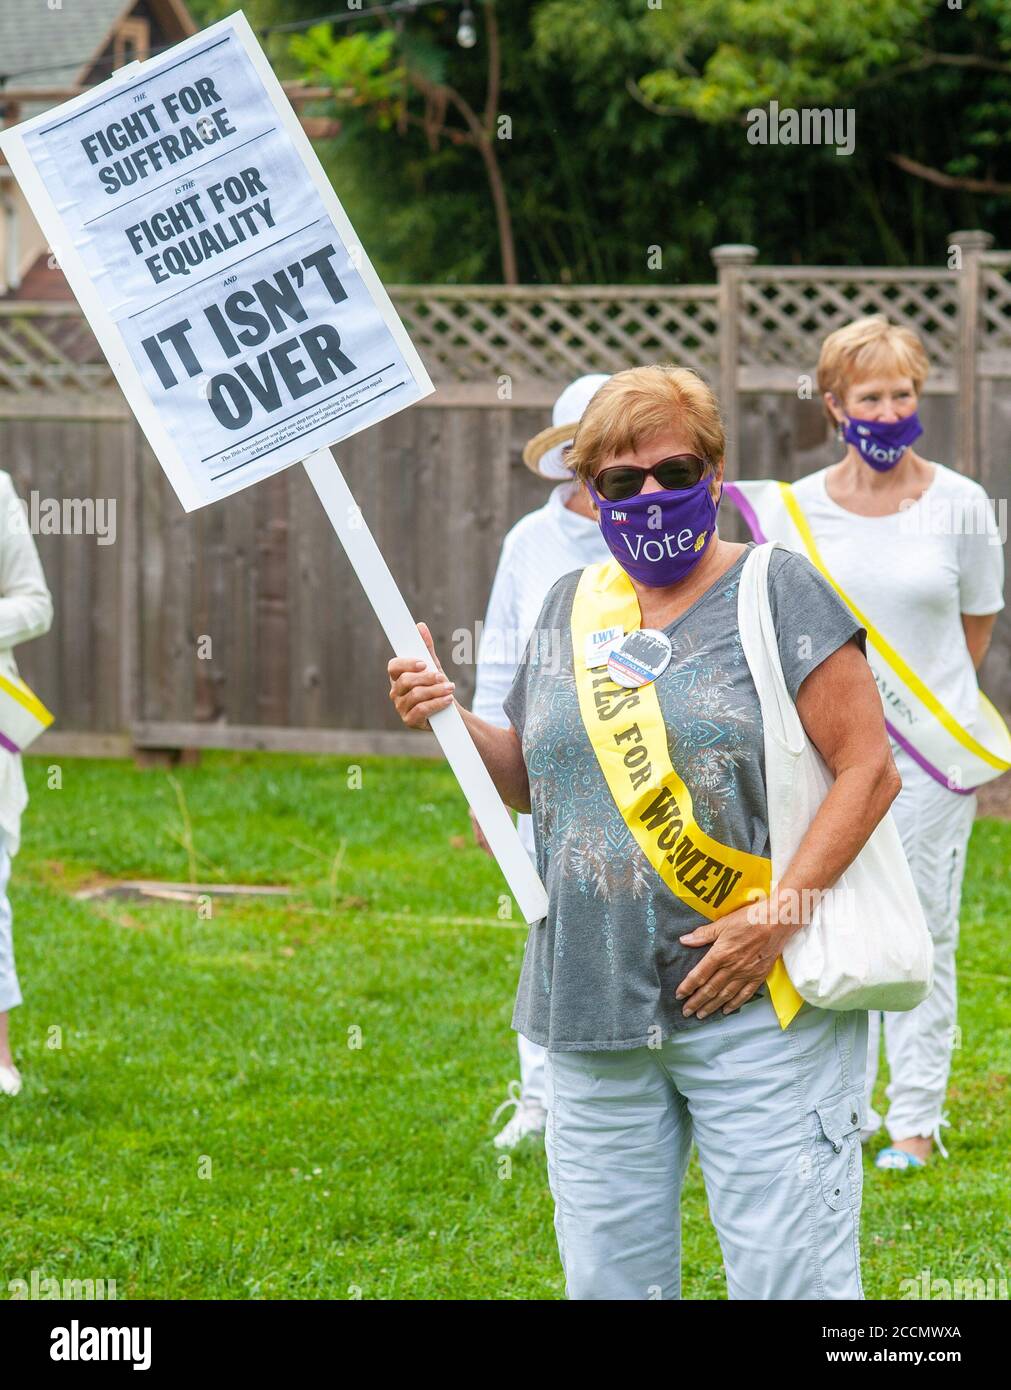 Lumberville, Pennsylvania, USA. 23rd Aug, 2020. Elaine Rafferty of Lawrenceville, NJ holds a sign during a 'Passing of the Suffrage Torch' event in which members of both Leagues will walk out on the Lumberville C Raven Rock Bridge to meet one another; our League will then pass across a replica suffrage torch Sunday, August 23, 2020 at Lumberville Bridge in Lumberville, Pennsylvania. This symbolic event is honoring the work of the suffragists and recalling the WomenÕs Political Union 1915 campaign for the right to vote, during which a torch was carried through New York and New Jersey by members Stock Photo